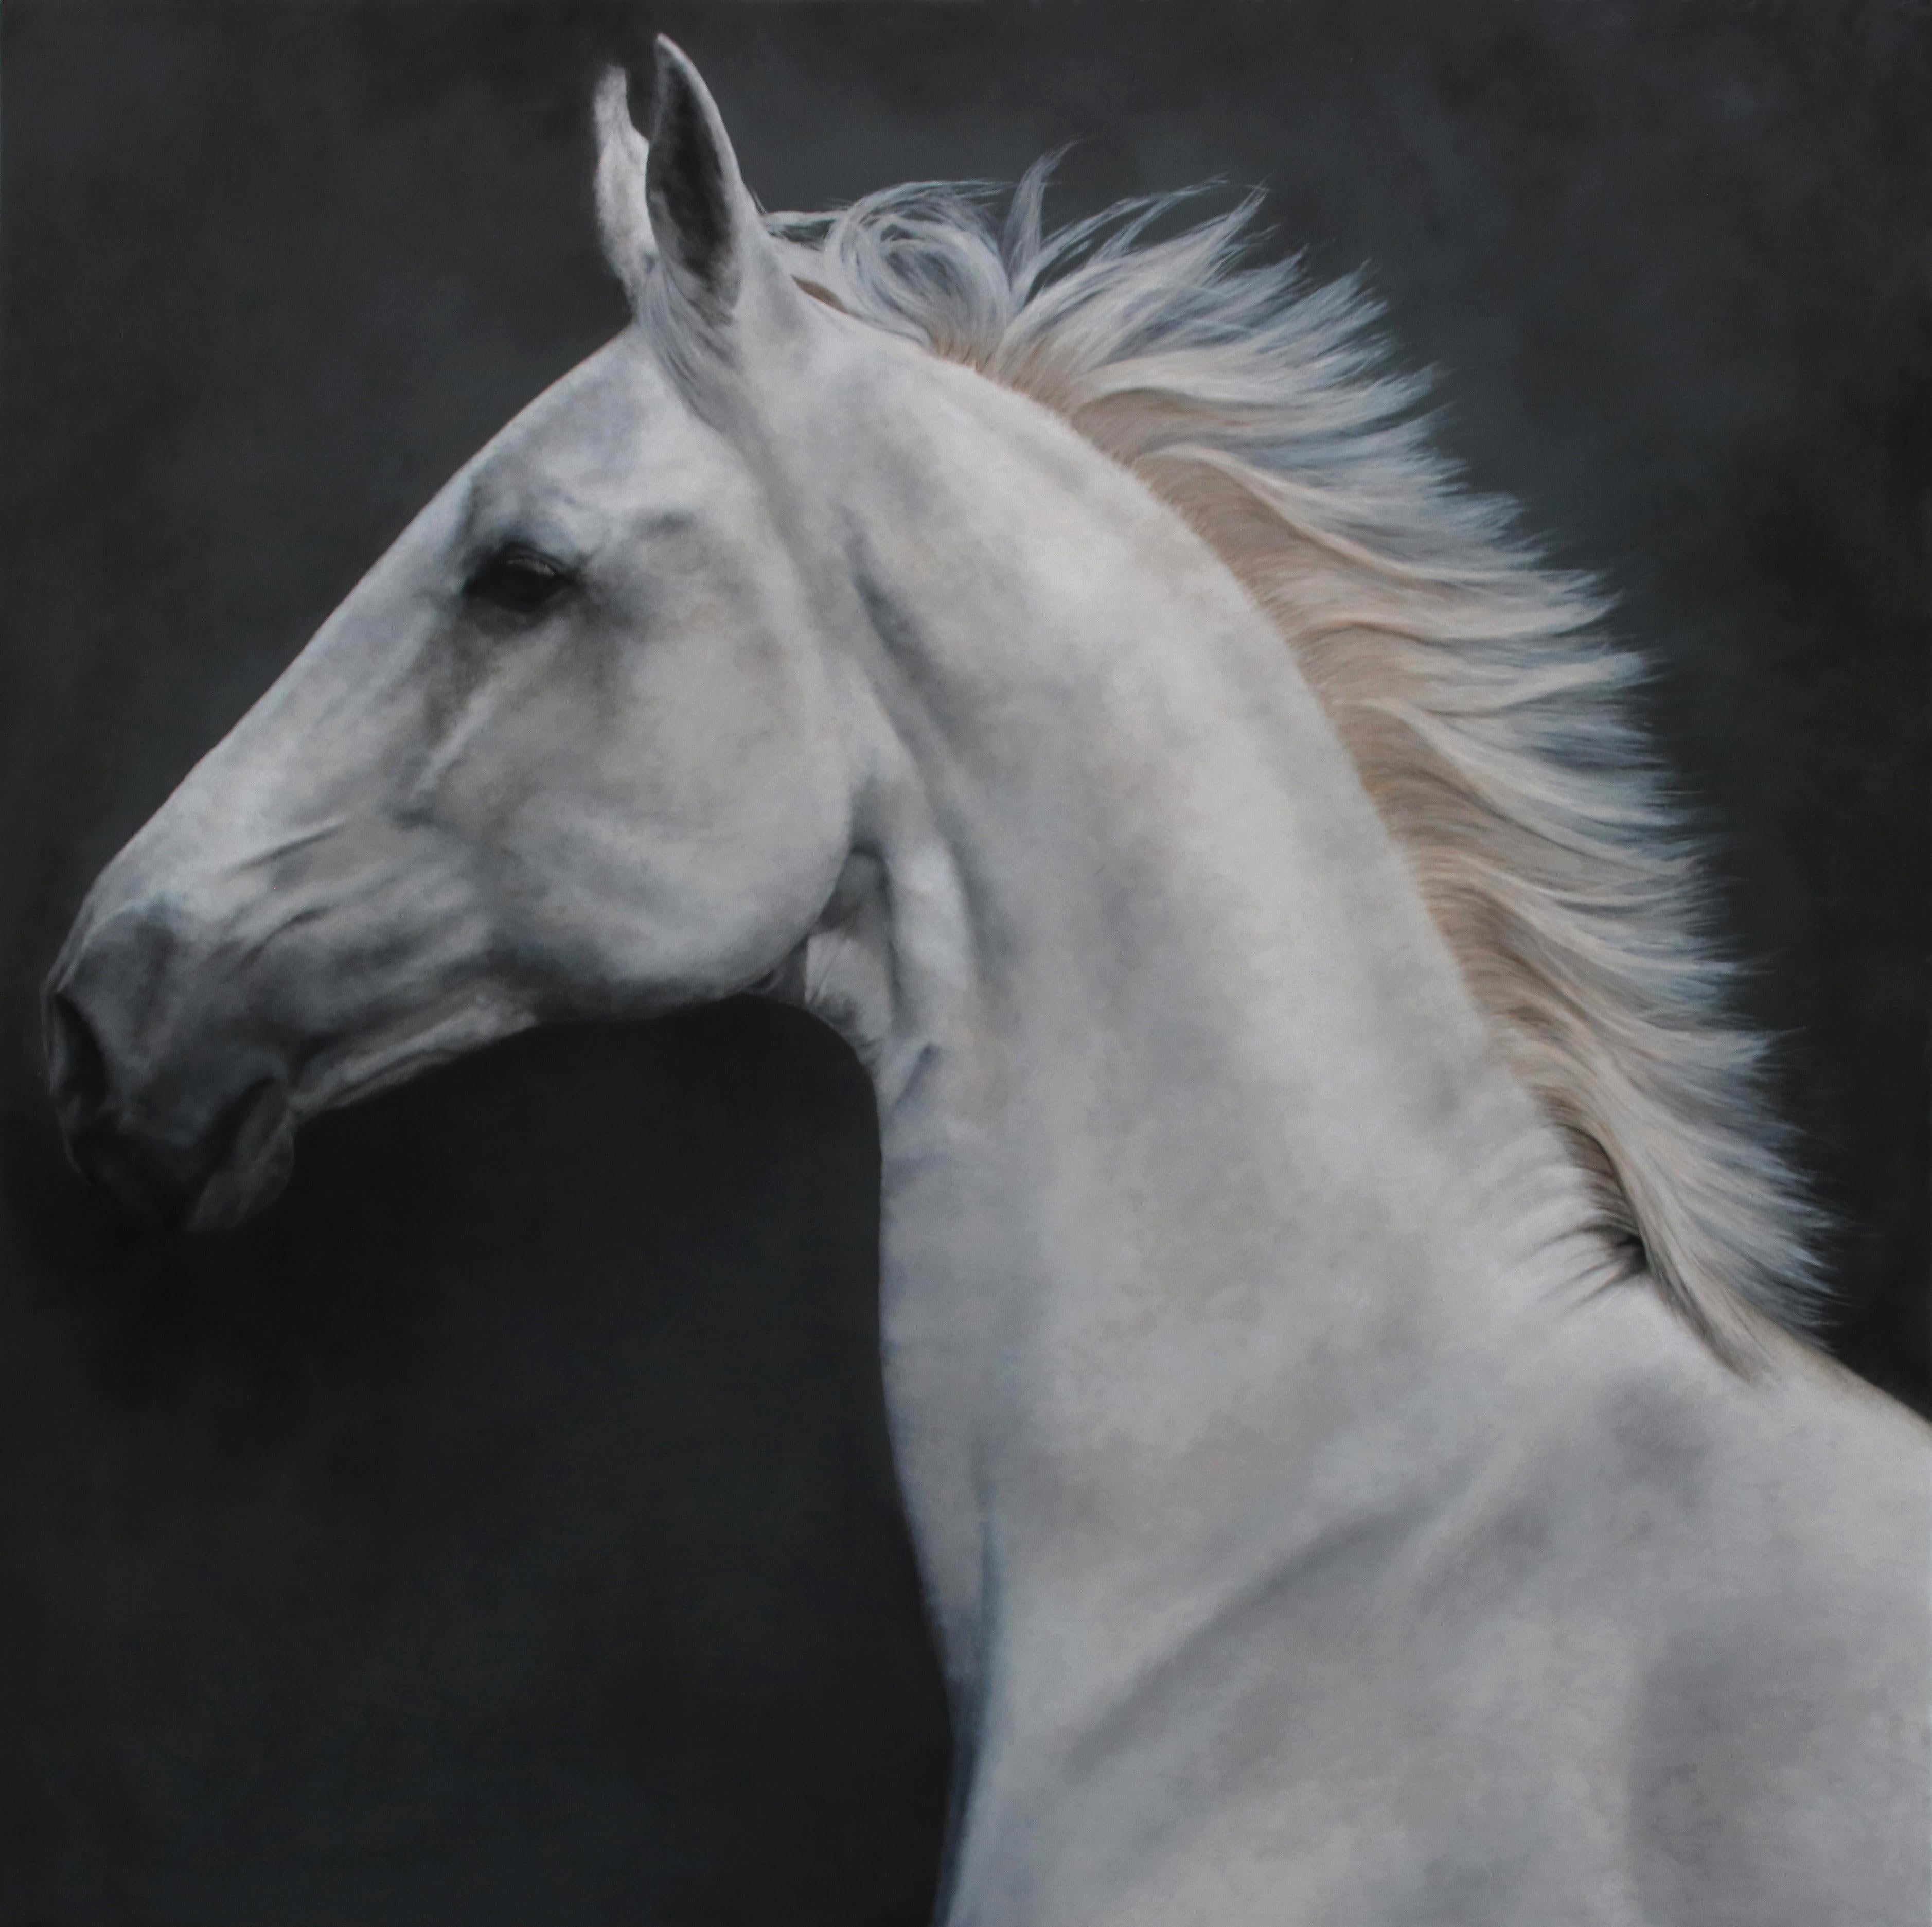 Equus 3, Equestrian, Contemporary, Realist - Painting by Anne-Marie Kornachuk